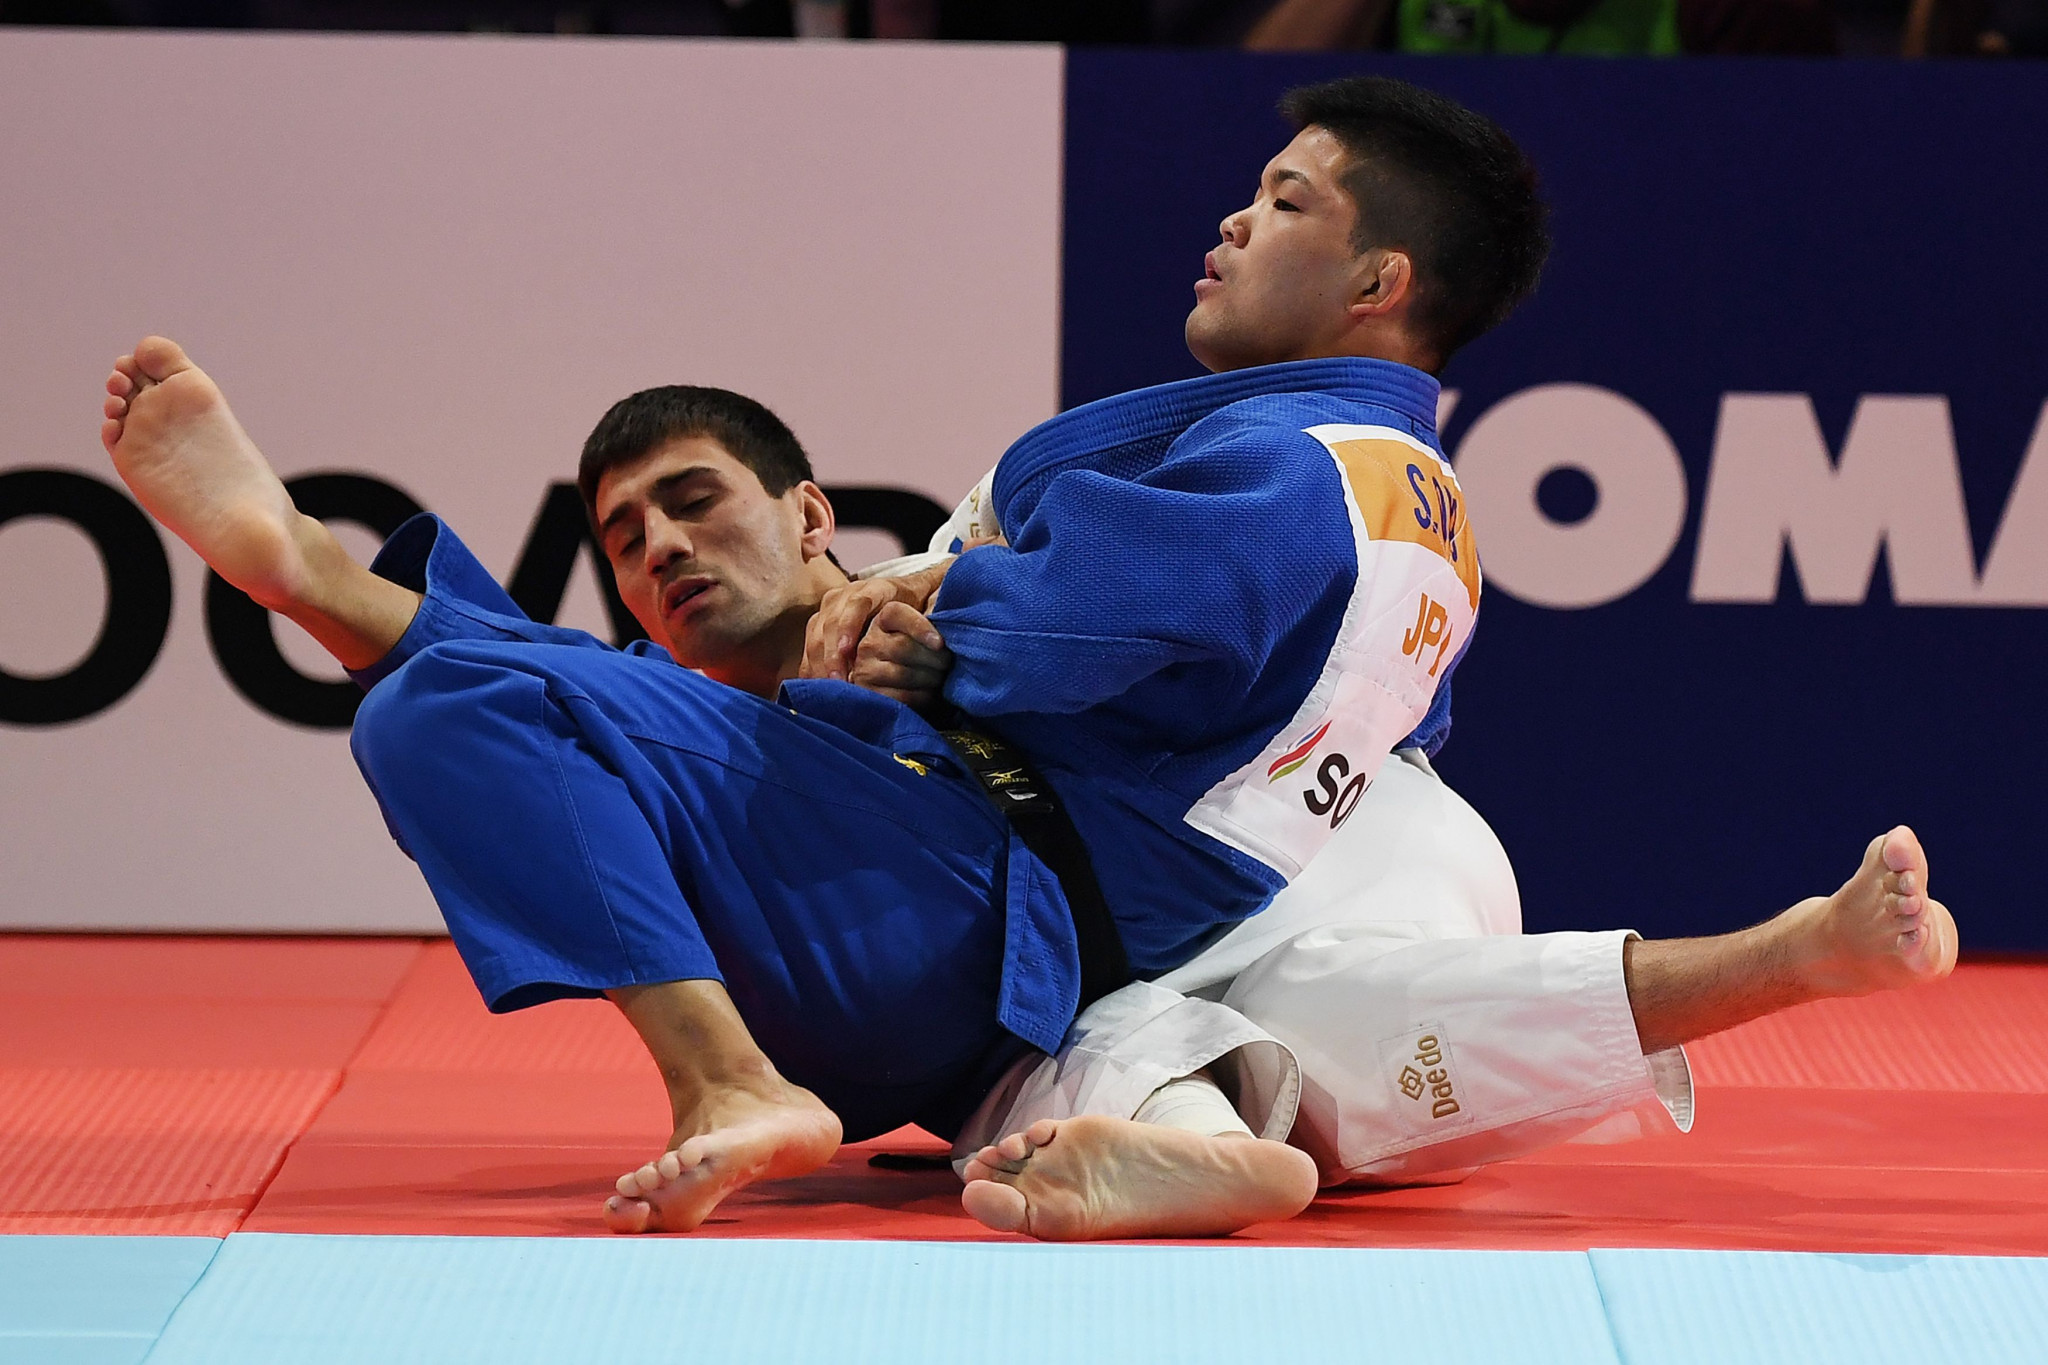 Shohei Ono throws Rustam Orujov on his way to claiming his third World Championship victory ©Getty Images